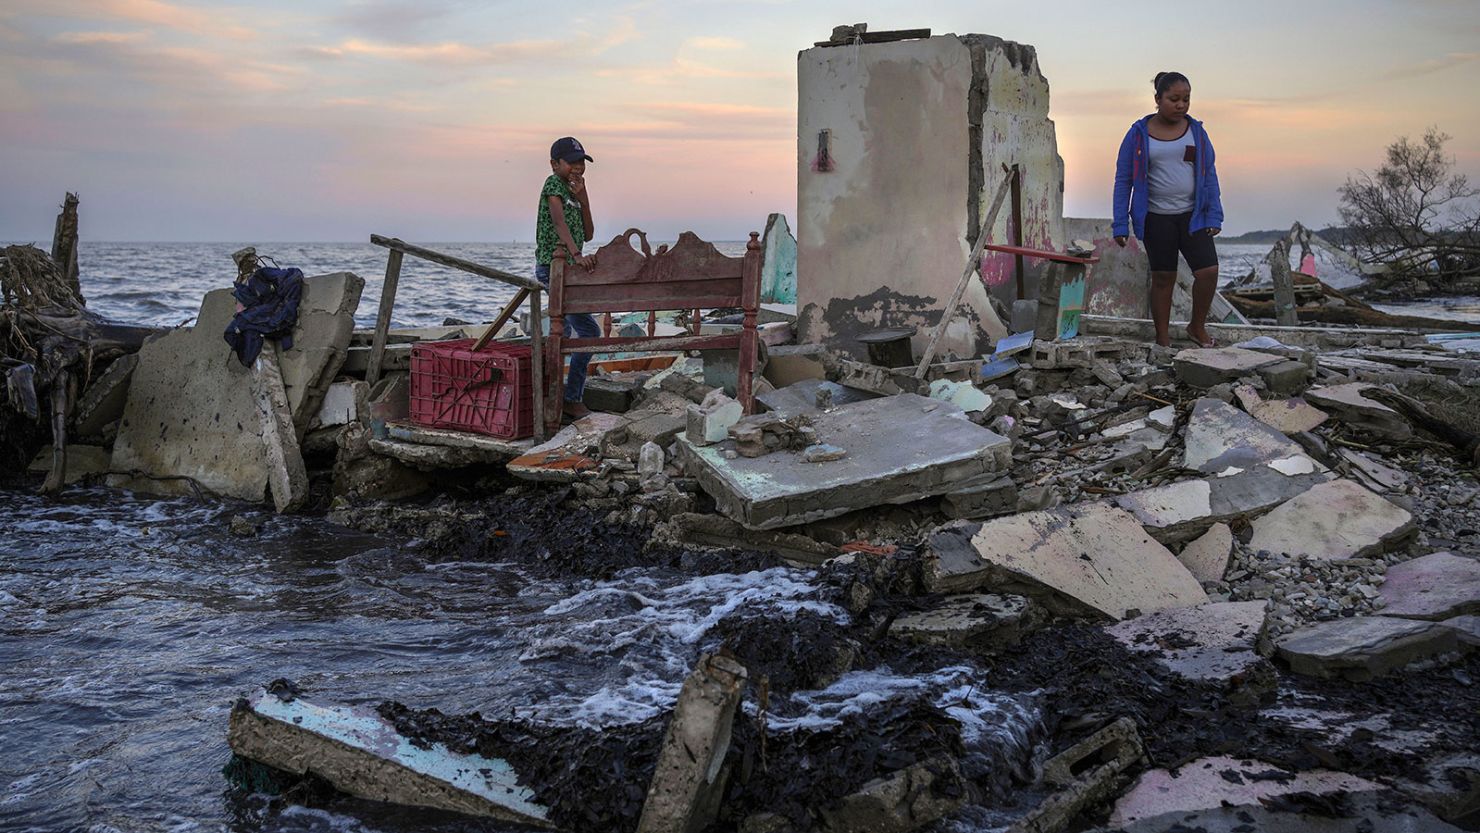 Researchers say individuals will often bear the economic burden of climate change. Yahir Mayoral and Emily Camacho walk amid the rubble of their grandmother's home, destroyed by flooding driven by a sea-level rise in their coastal community of El Bosque, in the state of Tabasco, Mexico, Nov. 30, 2023. (AP Photo/Felix Marquez, File)